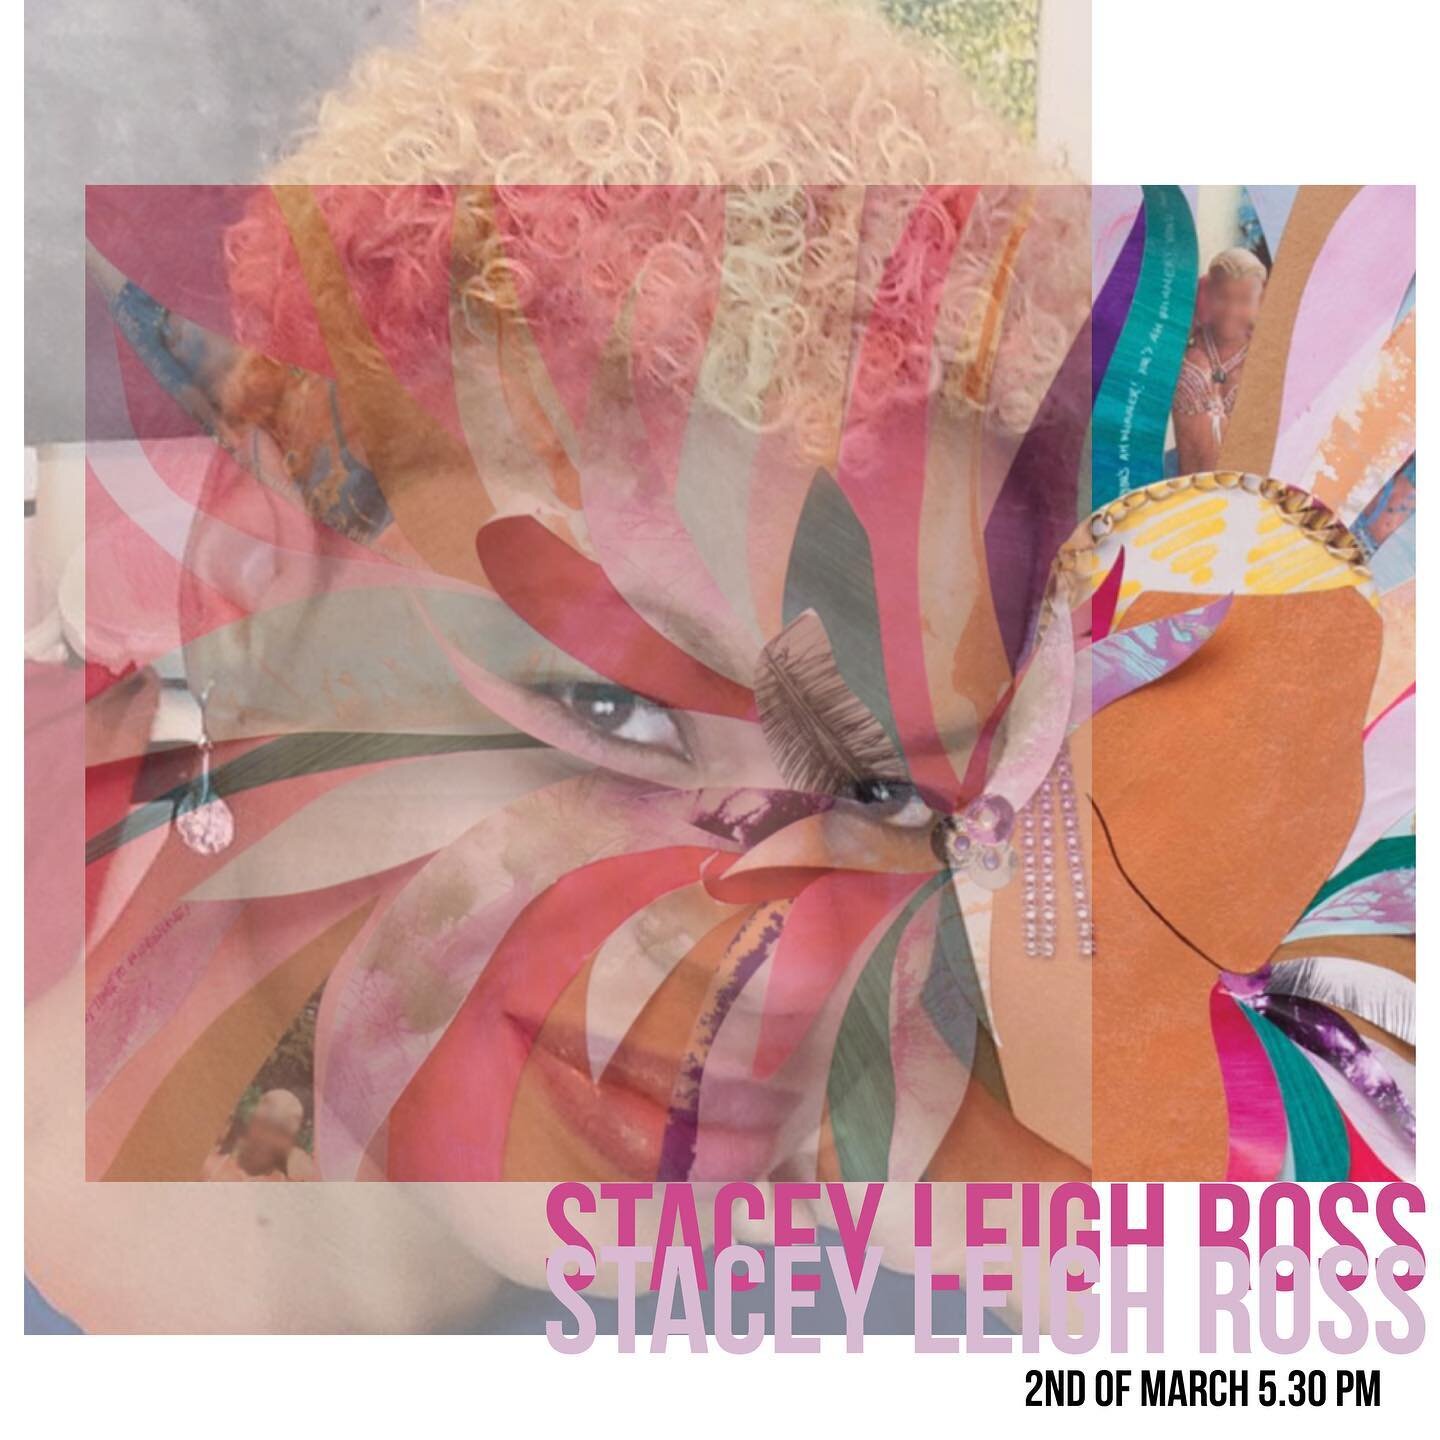 OUR NEXT COMMUNITY TALK :

&quot;Could Carnival Save the World?&quot;

On the 2nd of March at 5.30 pm Stacey Leigh Ross shares how her creative practice led her home to Carnival. Her ongoing doctoral research, Carnival of Compassion seeks to cultivat